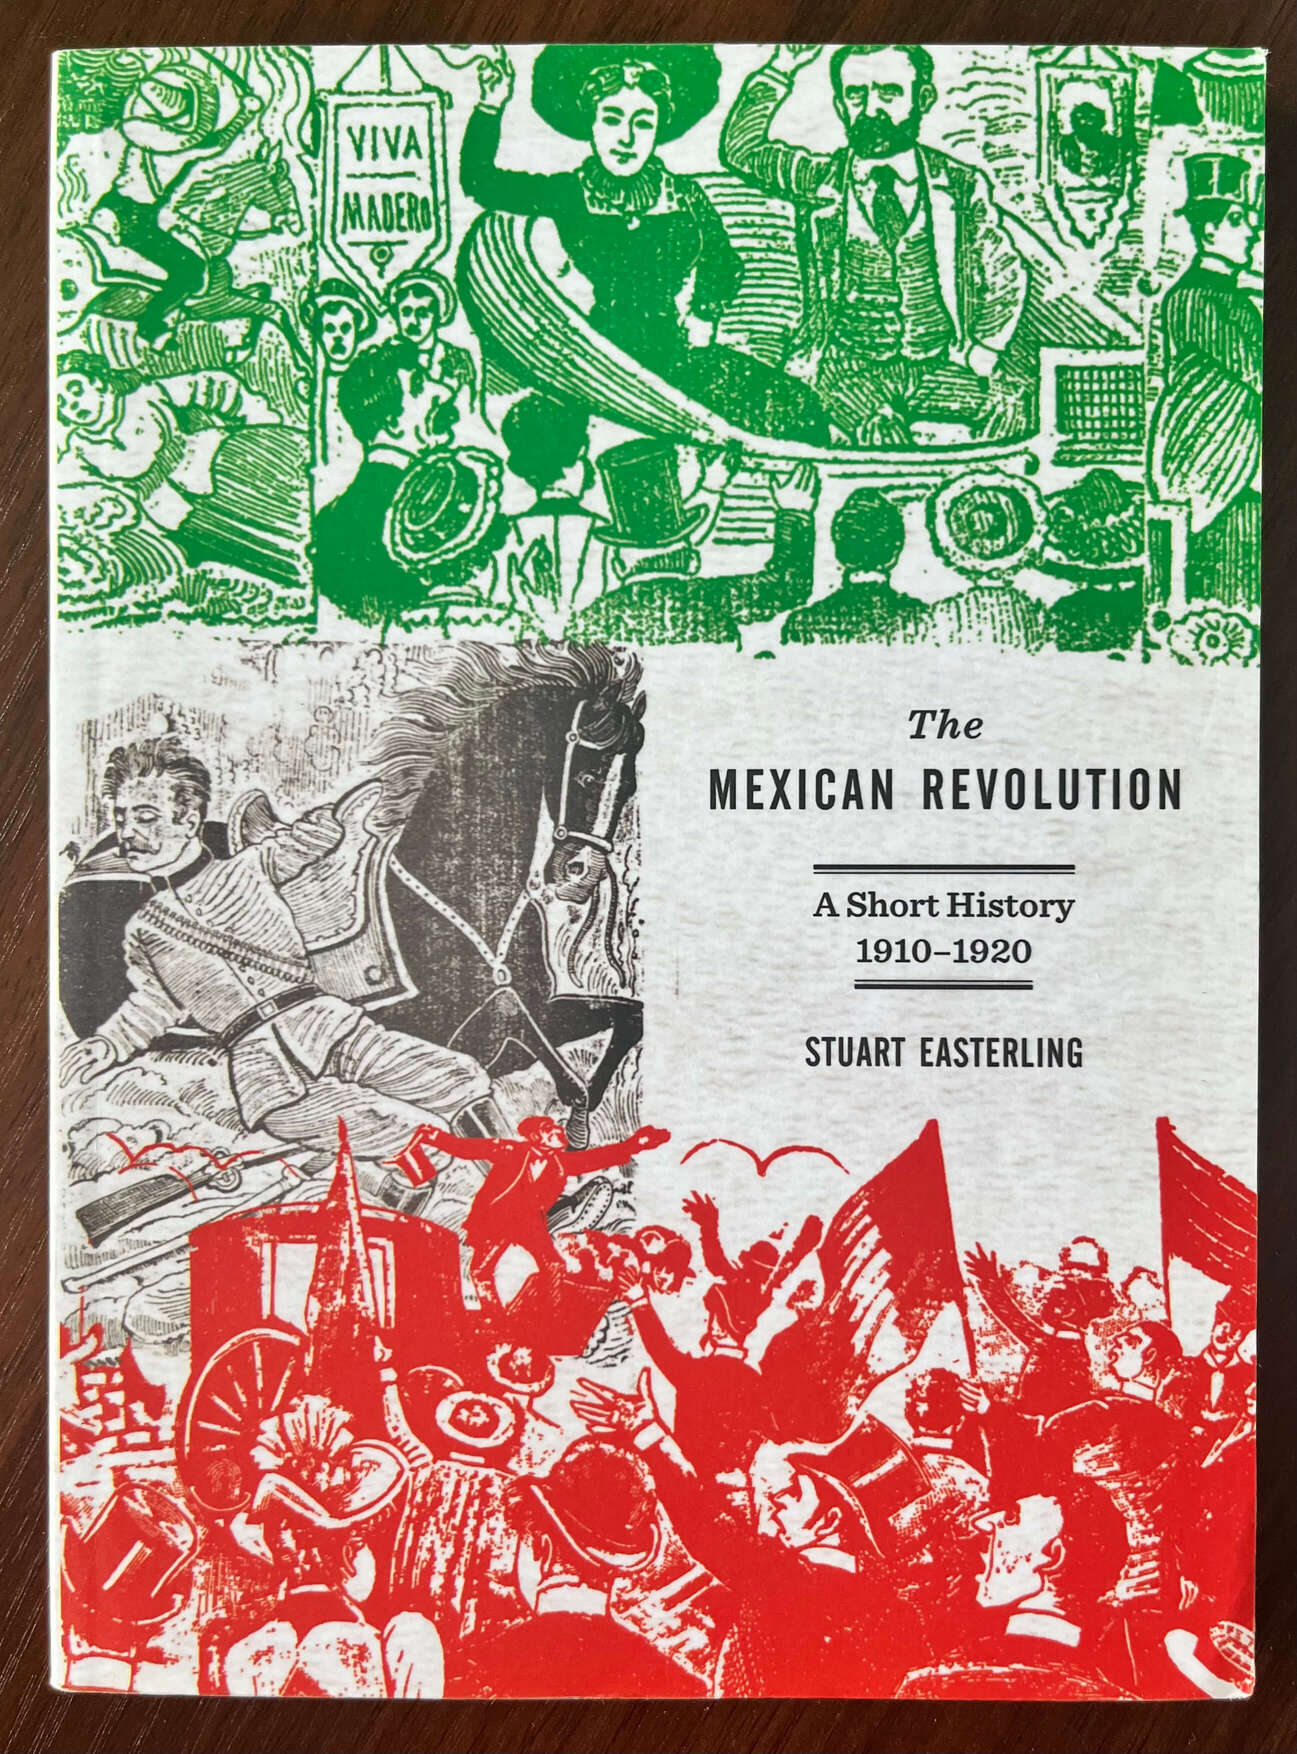 “The Mexican Revolution: A Short History 1910-1920” by Stuart Easterling”